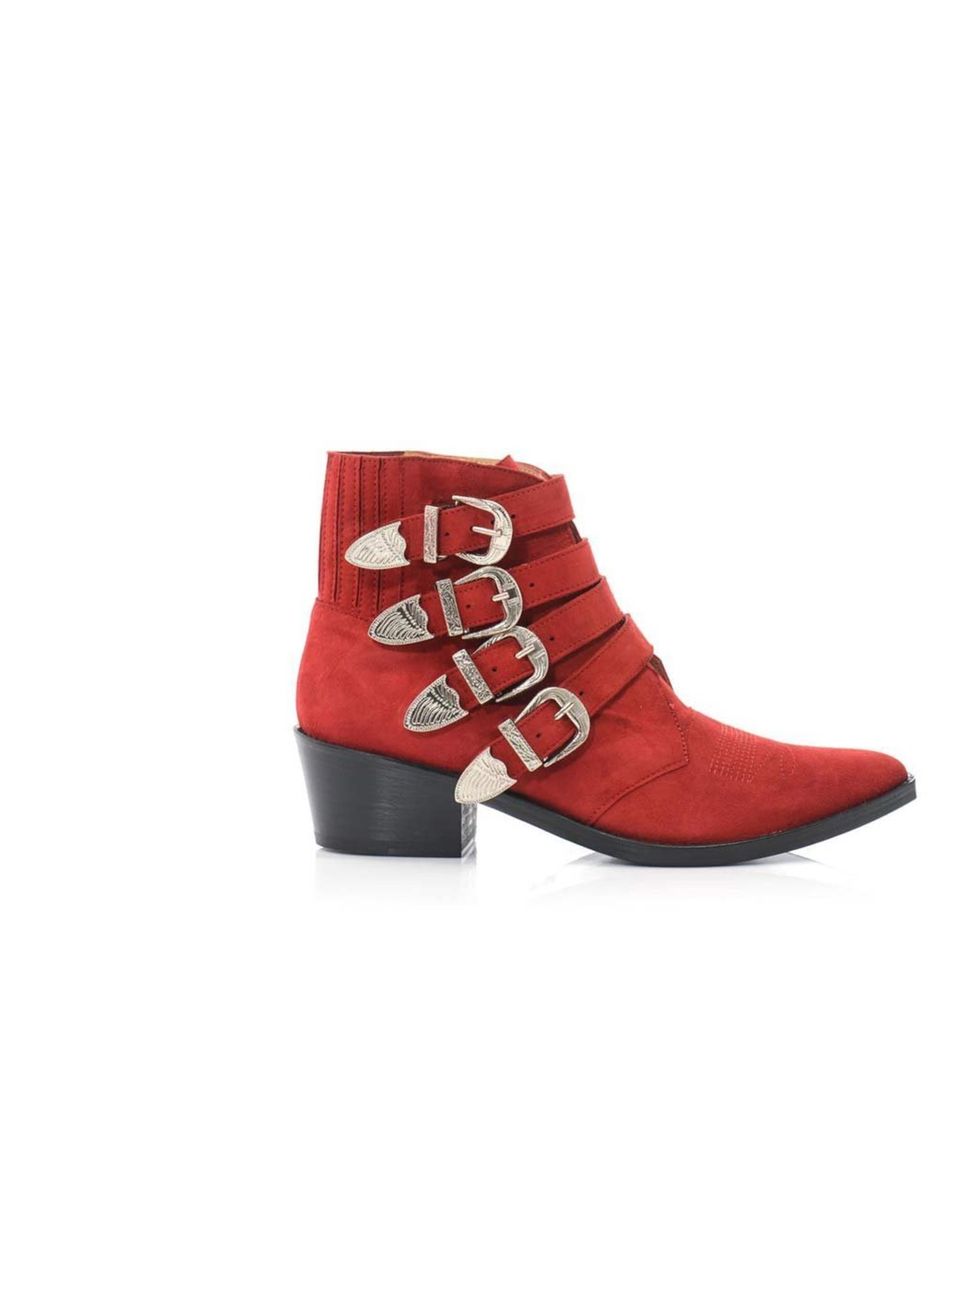 <p>We fell in love with Toga's classic buckled boots last winter... and now that we've seen them in red suede, we're feeling the need to add to our collection.</p><p>Toga Pulla boots, £330 at <a href="http://www.matchesfashion.com/product/179296">MatchesF